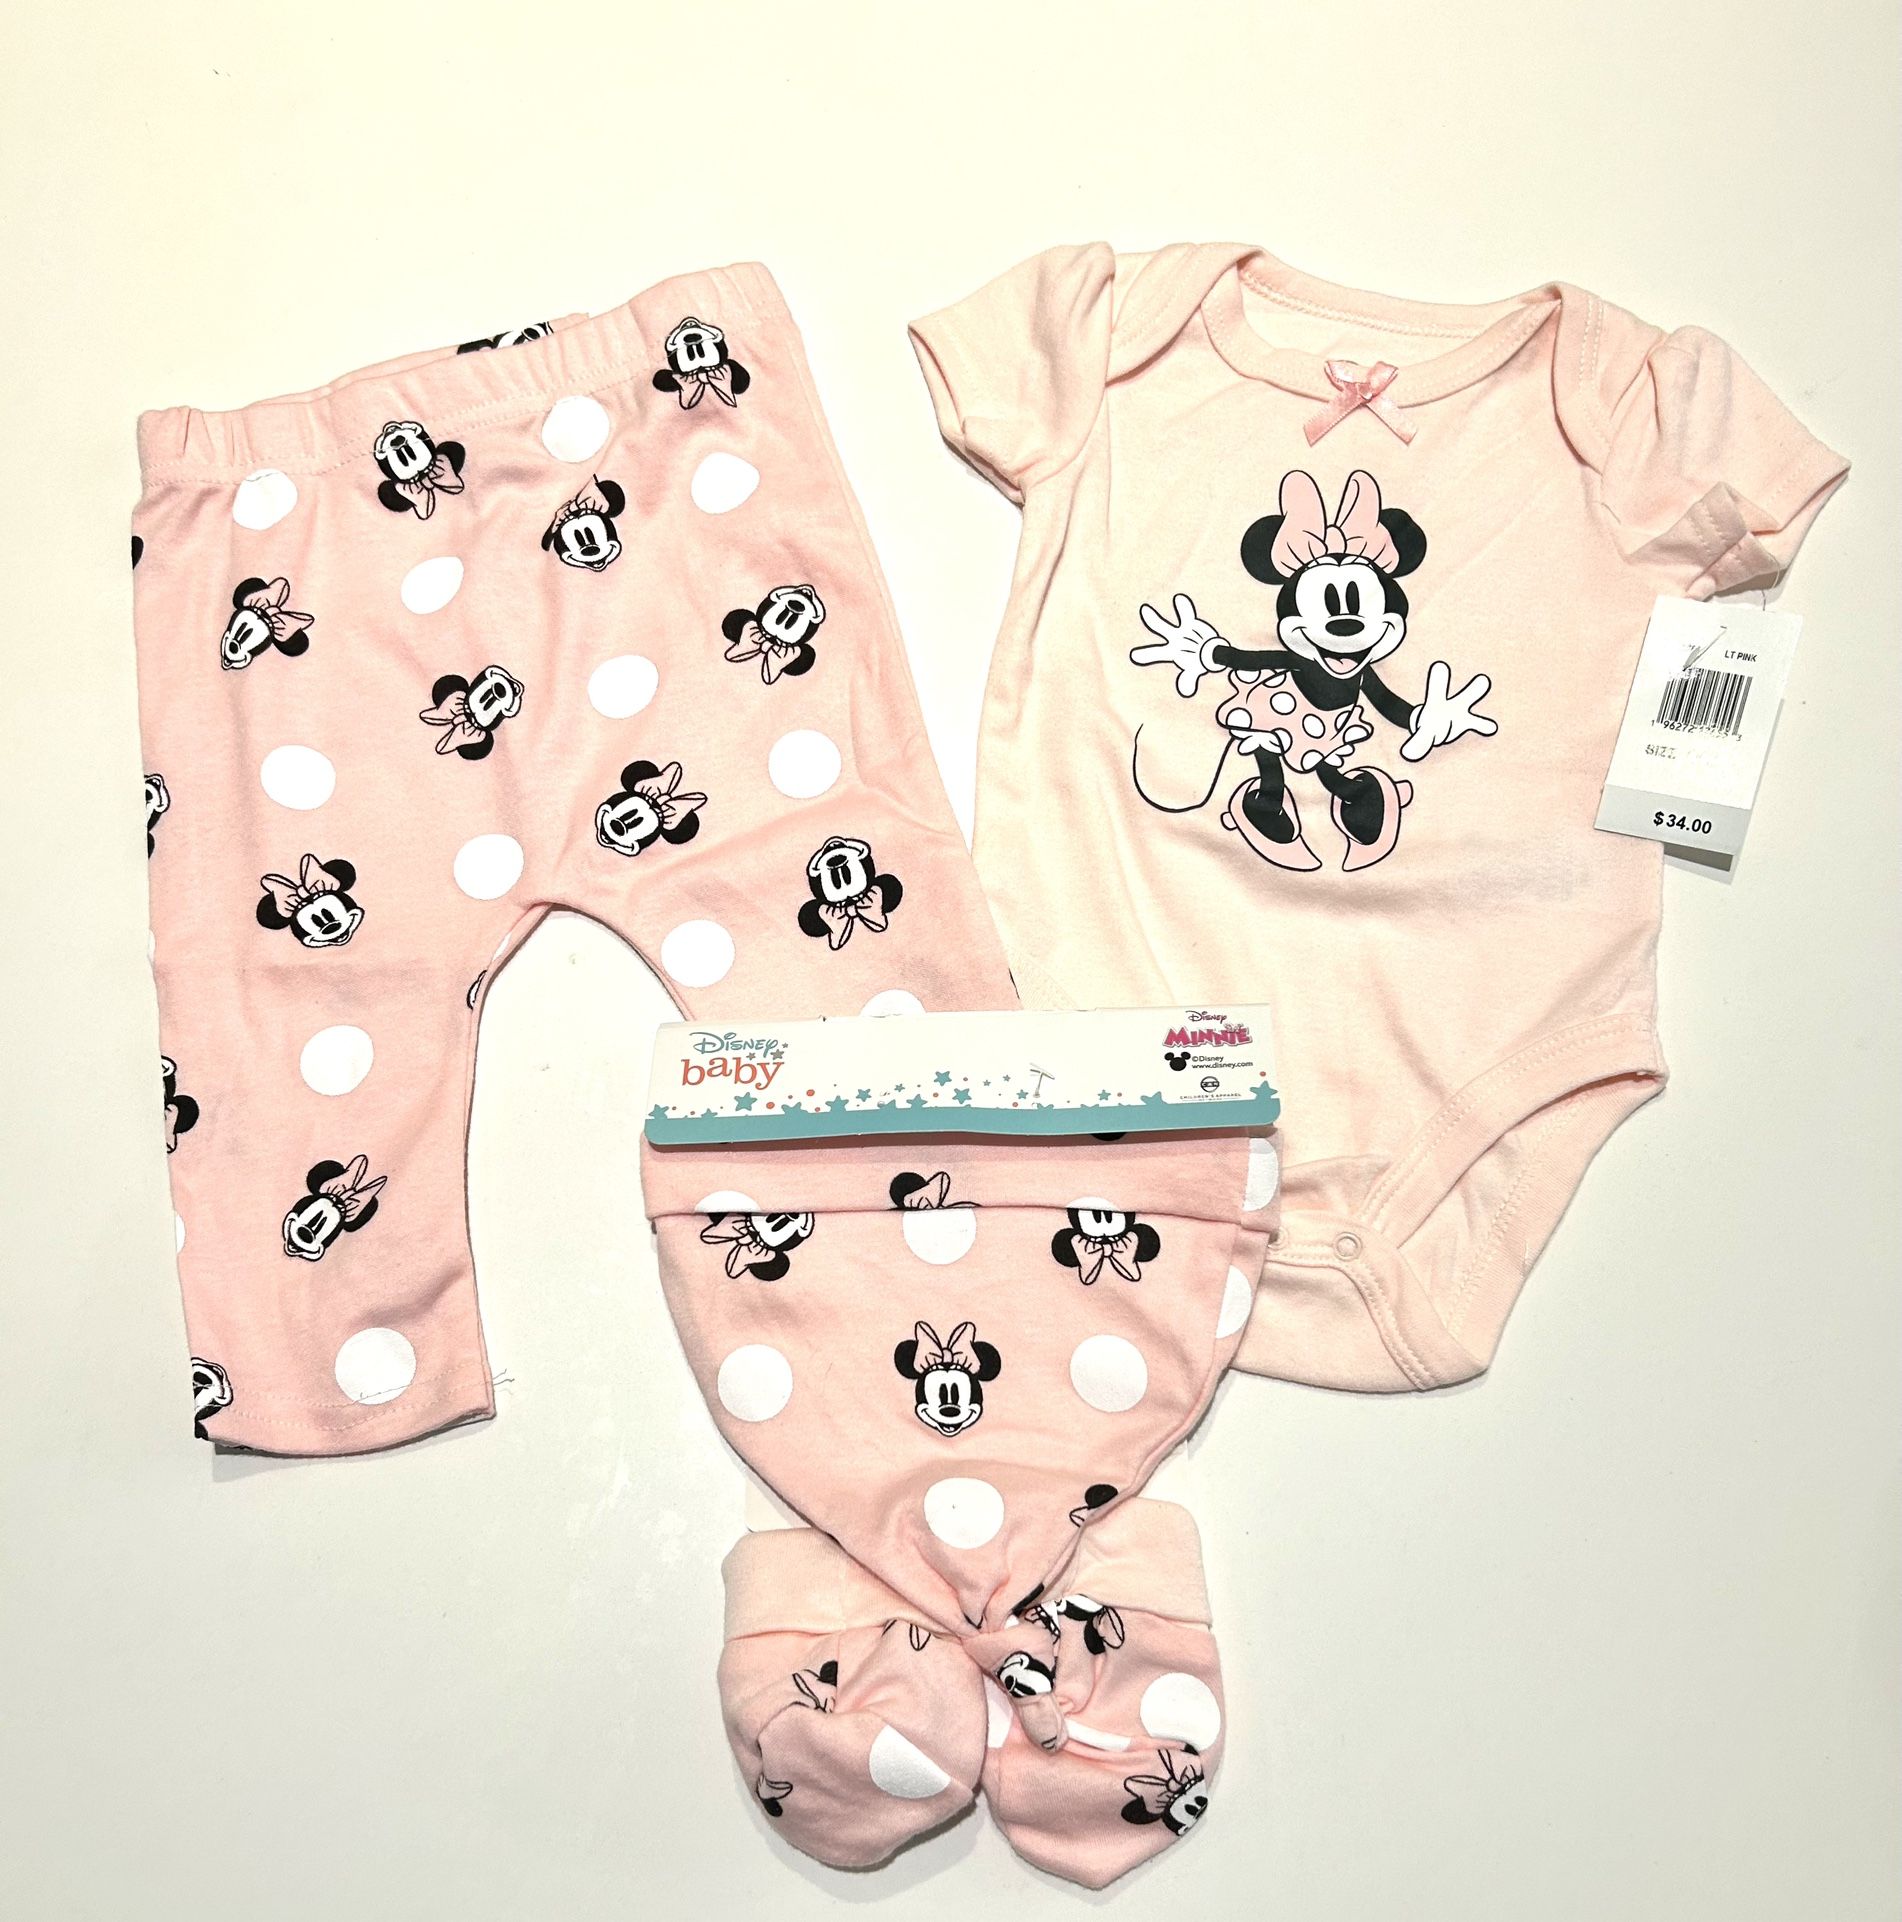 New! Disney Baby 4 Piece Set Minnie Mouse 6-9 Mo Hat, Booties, Shirt, Pants Pink